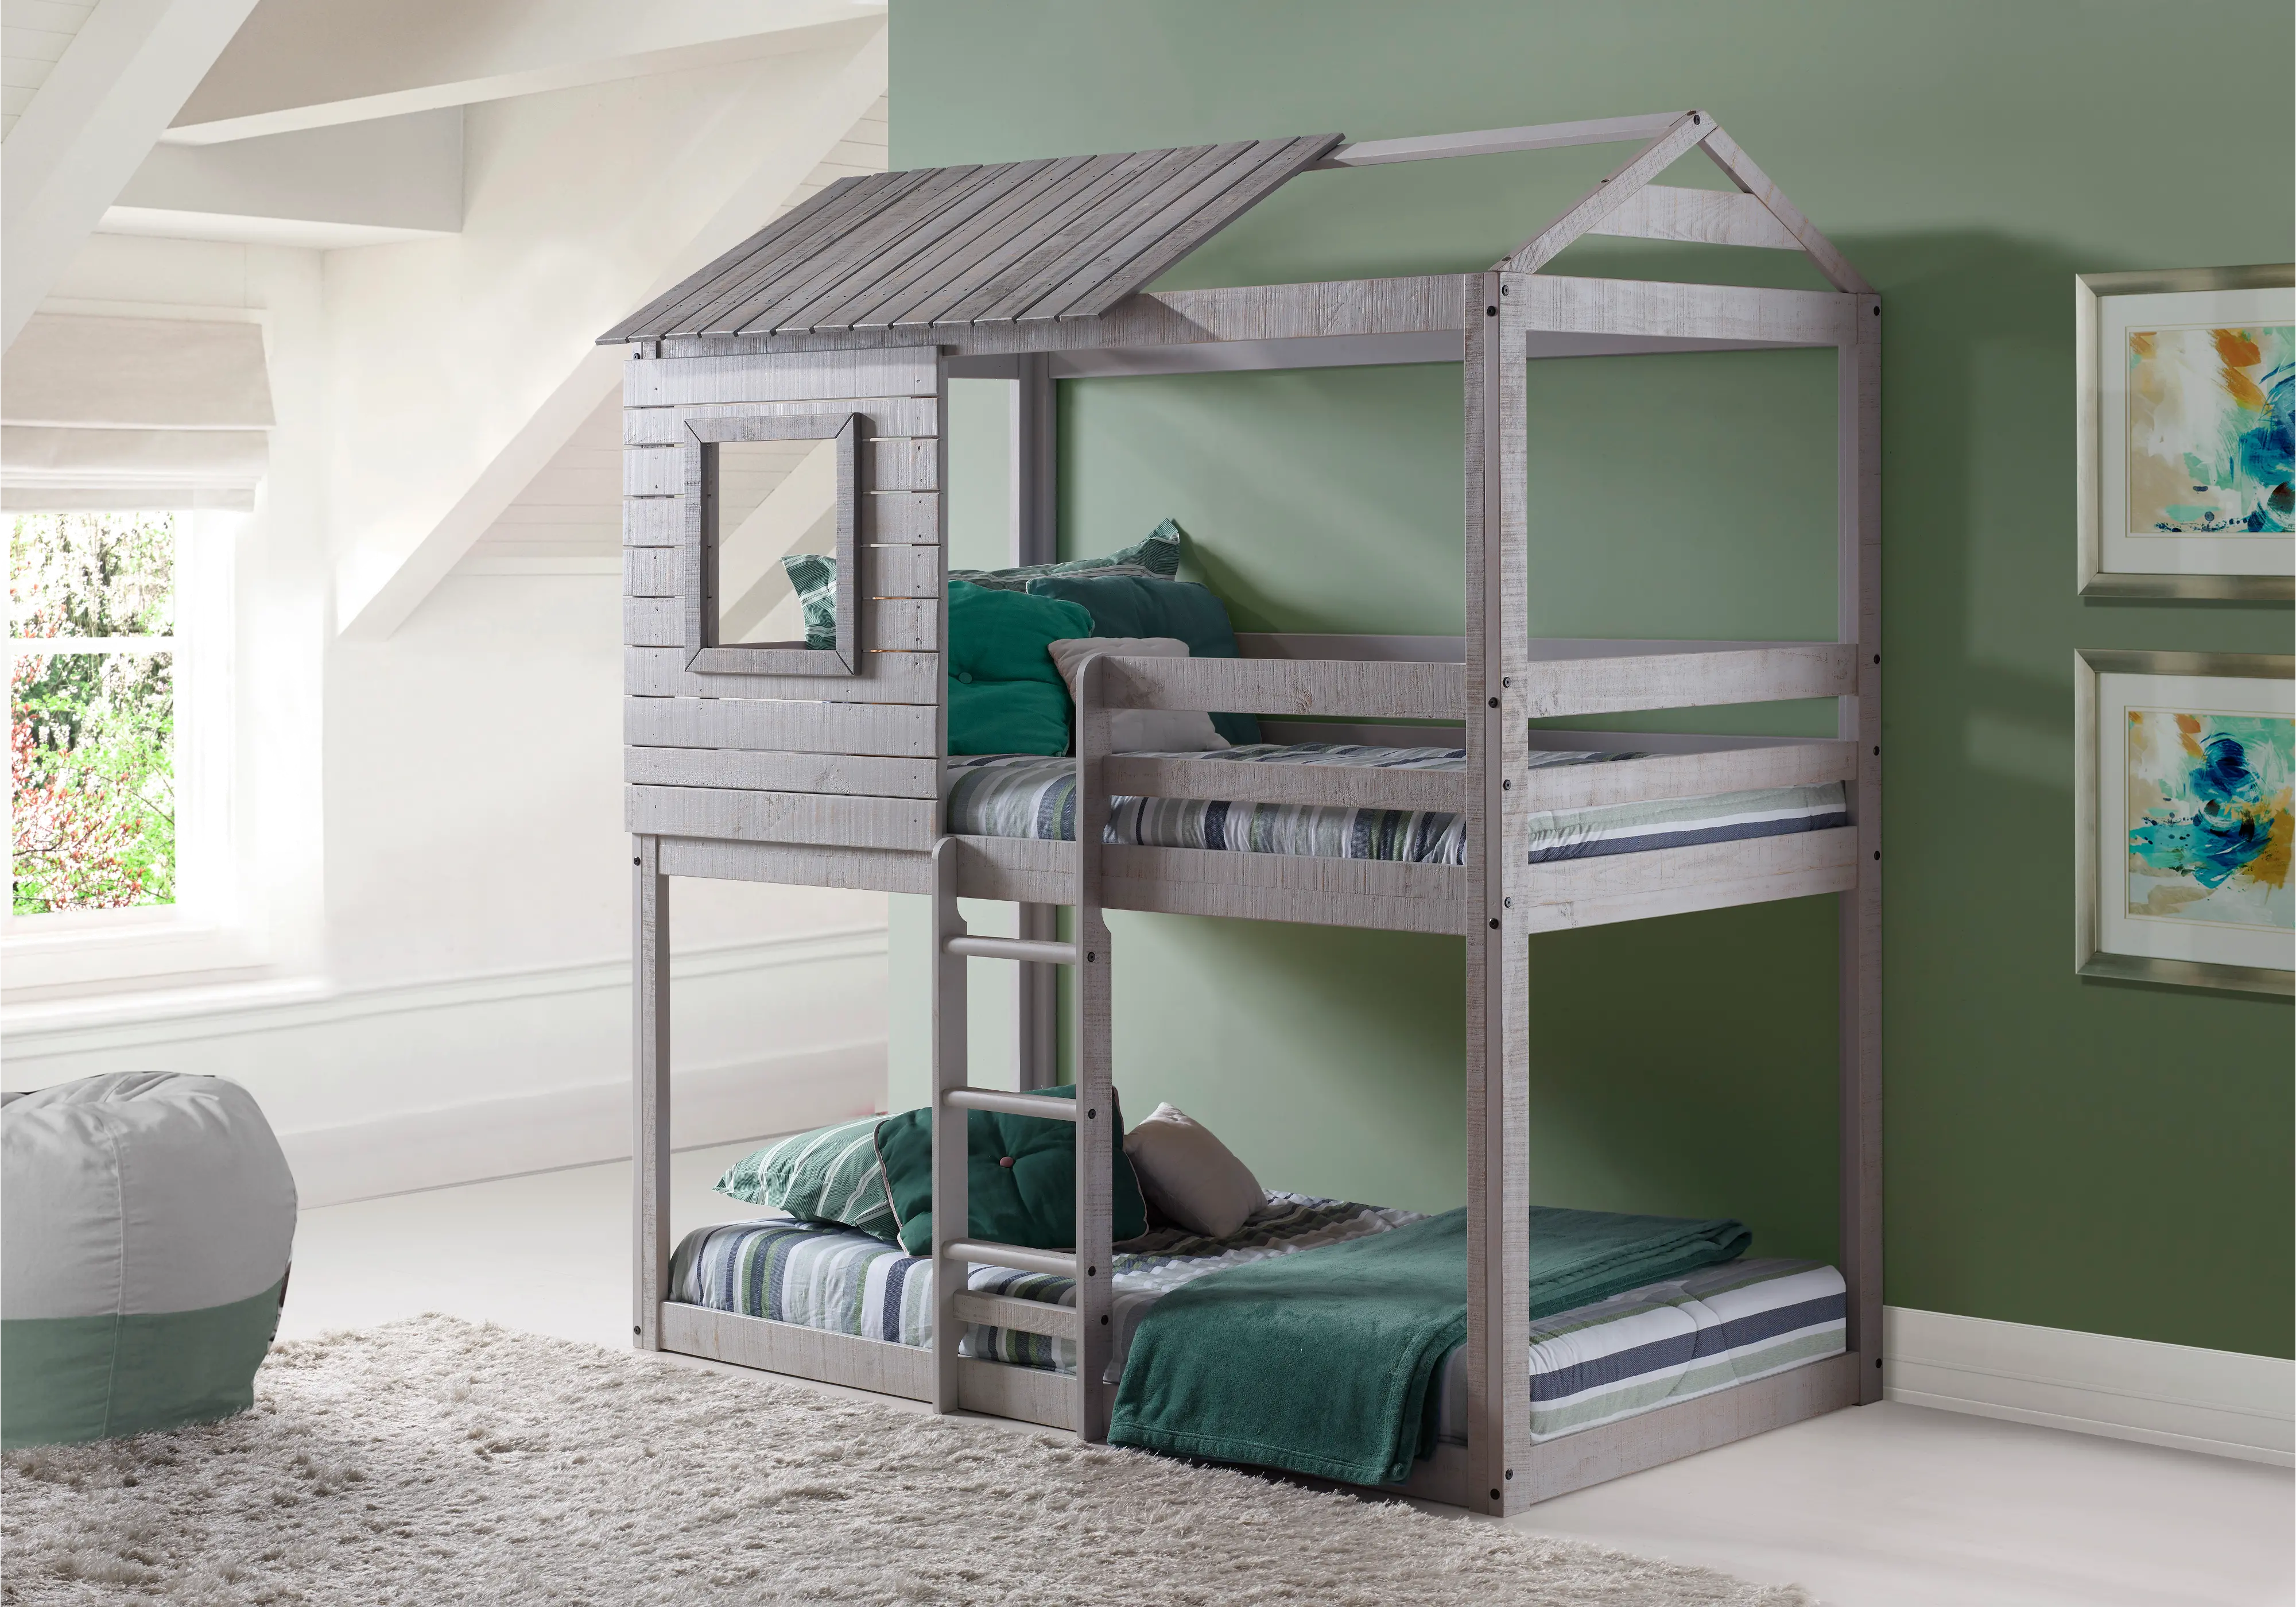 1370-TTLG Rustic Gray Twin over Twin Bunk Bed - Tree Fort sku 1370-TTLG